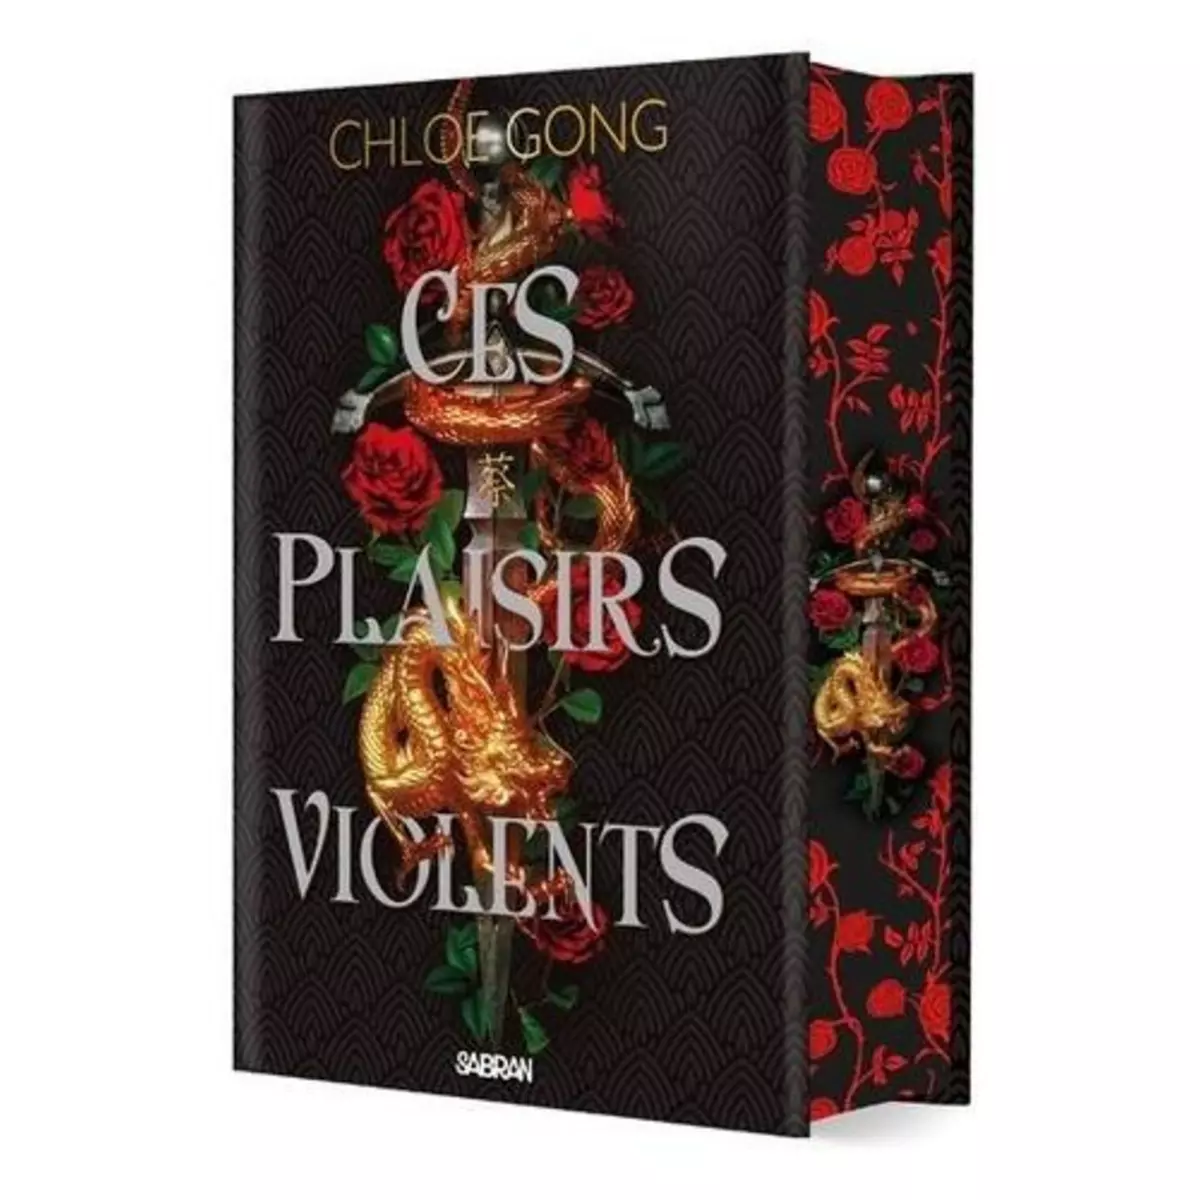  CES PLAISIRS VIOLENTS TOME 1 . EDITION COLLECTOR, Gong Chloe